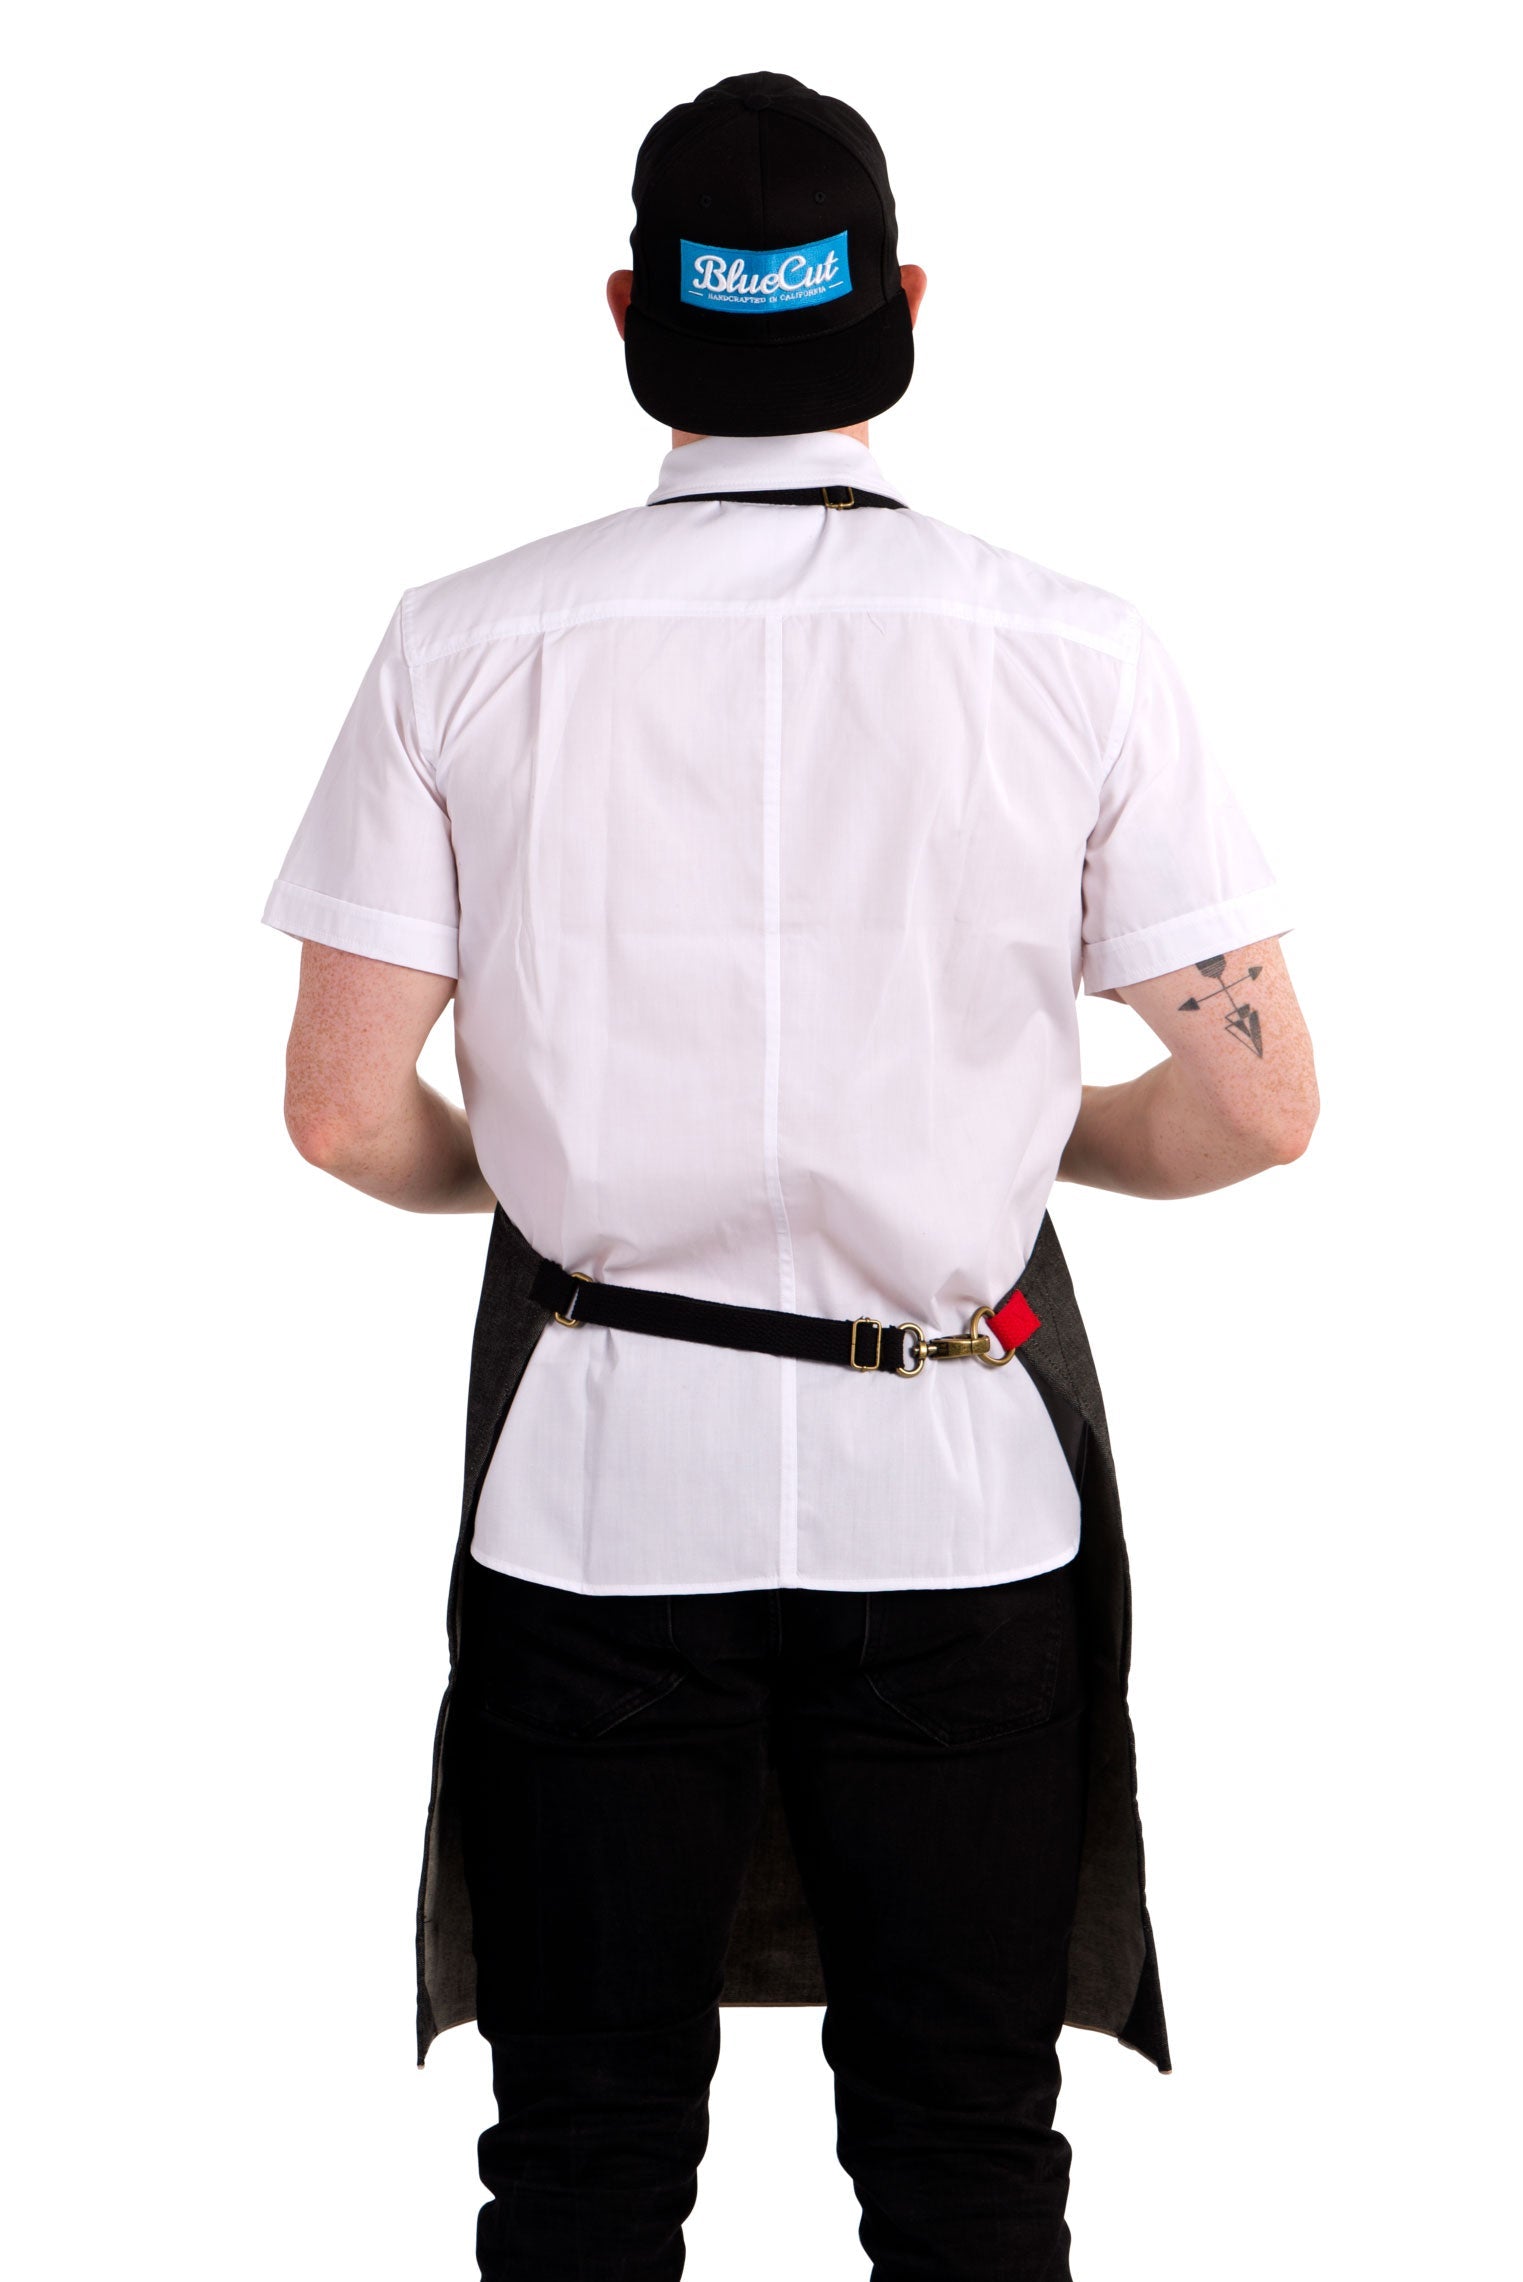 Back view image of person wearing Mason Apron in Black Selvage Denim. | BlueCut Aprons